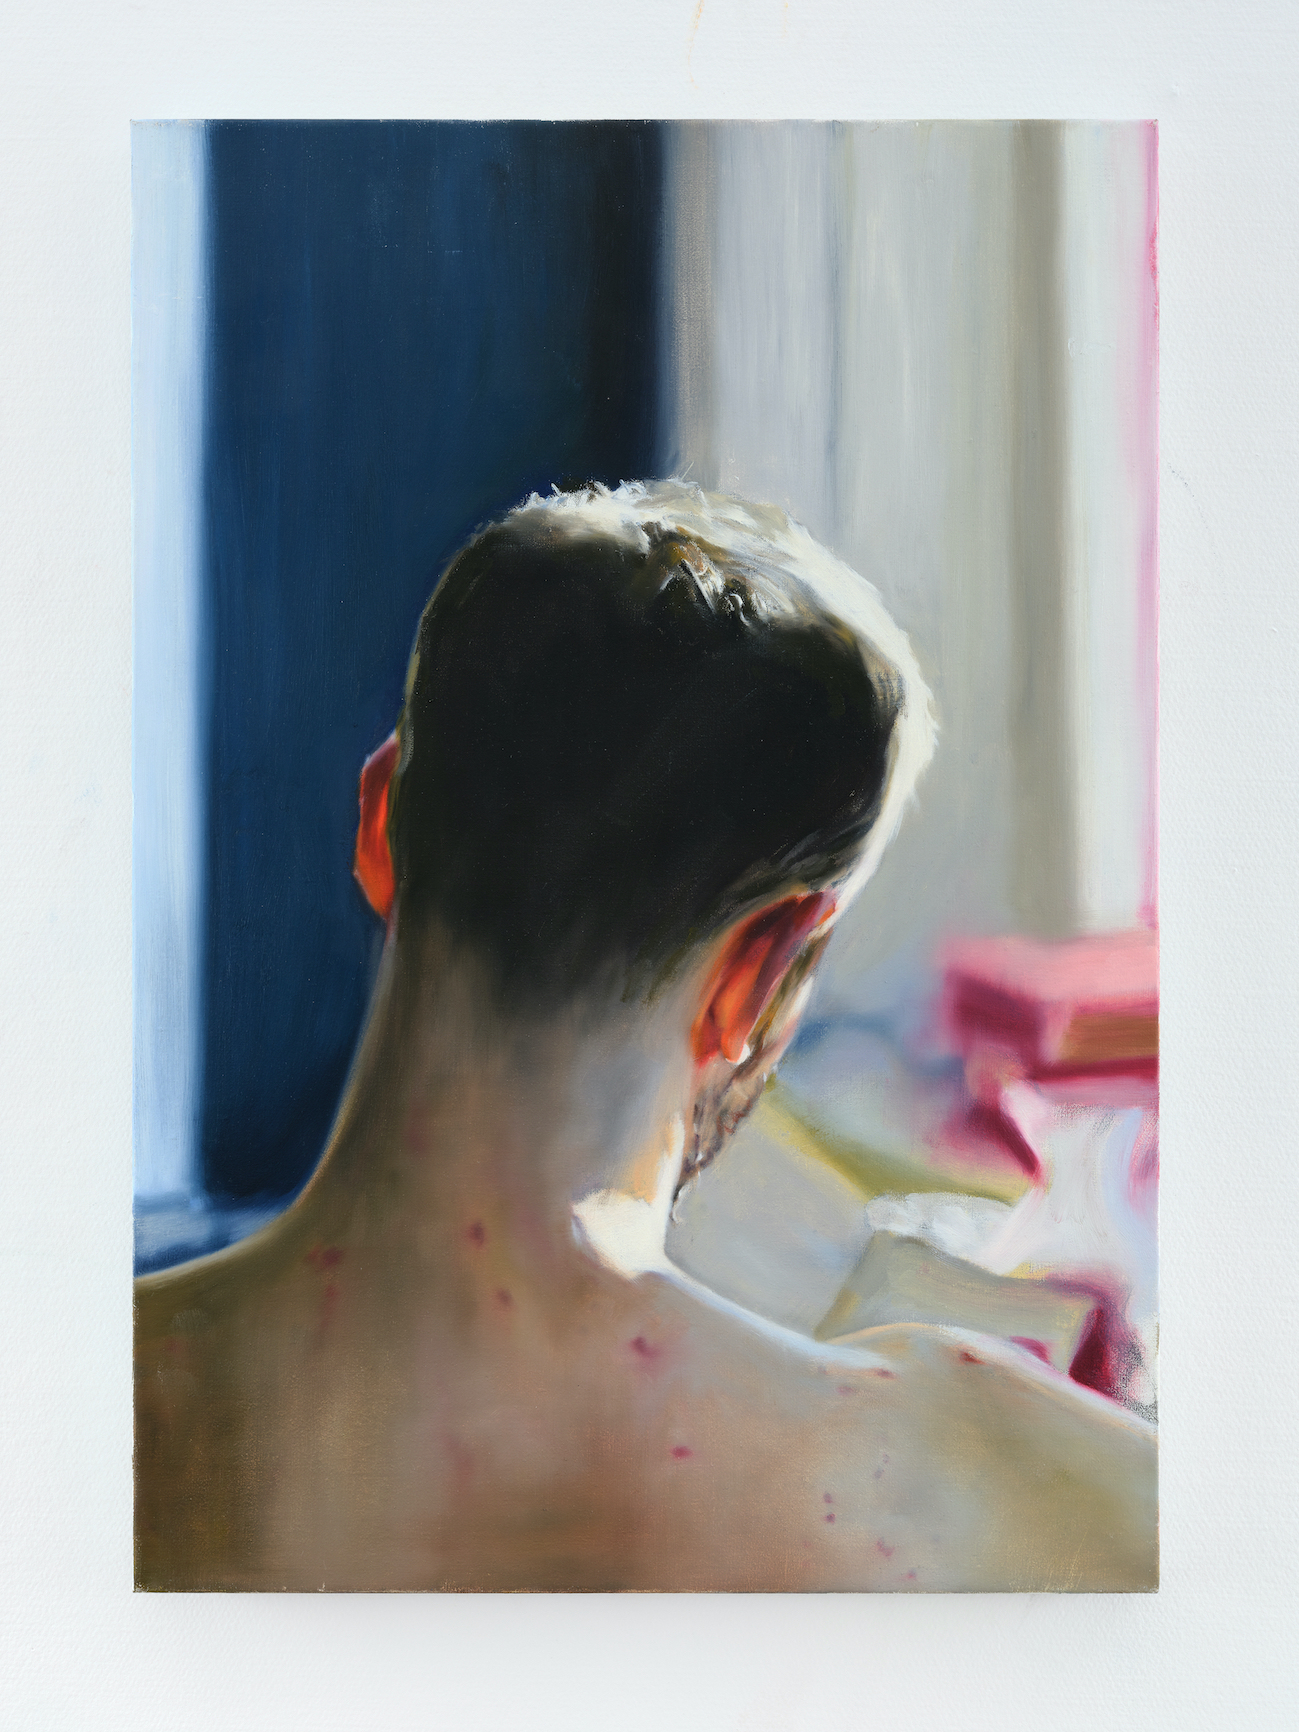 From the series: "THE WORDS"  (2021 - 2022).
Neck (Nacke), 2022. Oil on canvas, 68 x 47 cm. Photo: Jean Baptiste Béranger